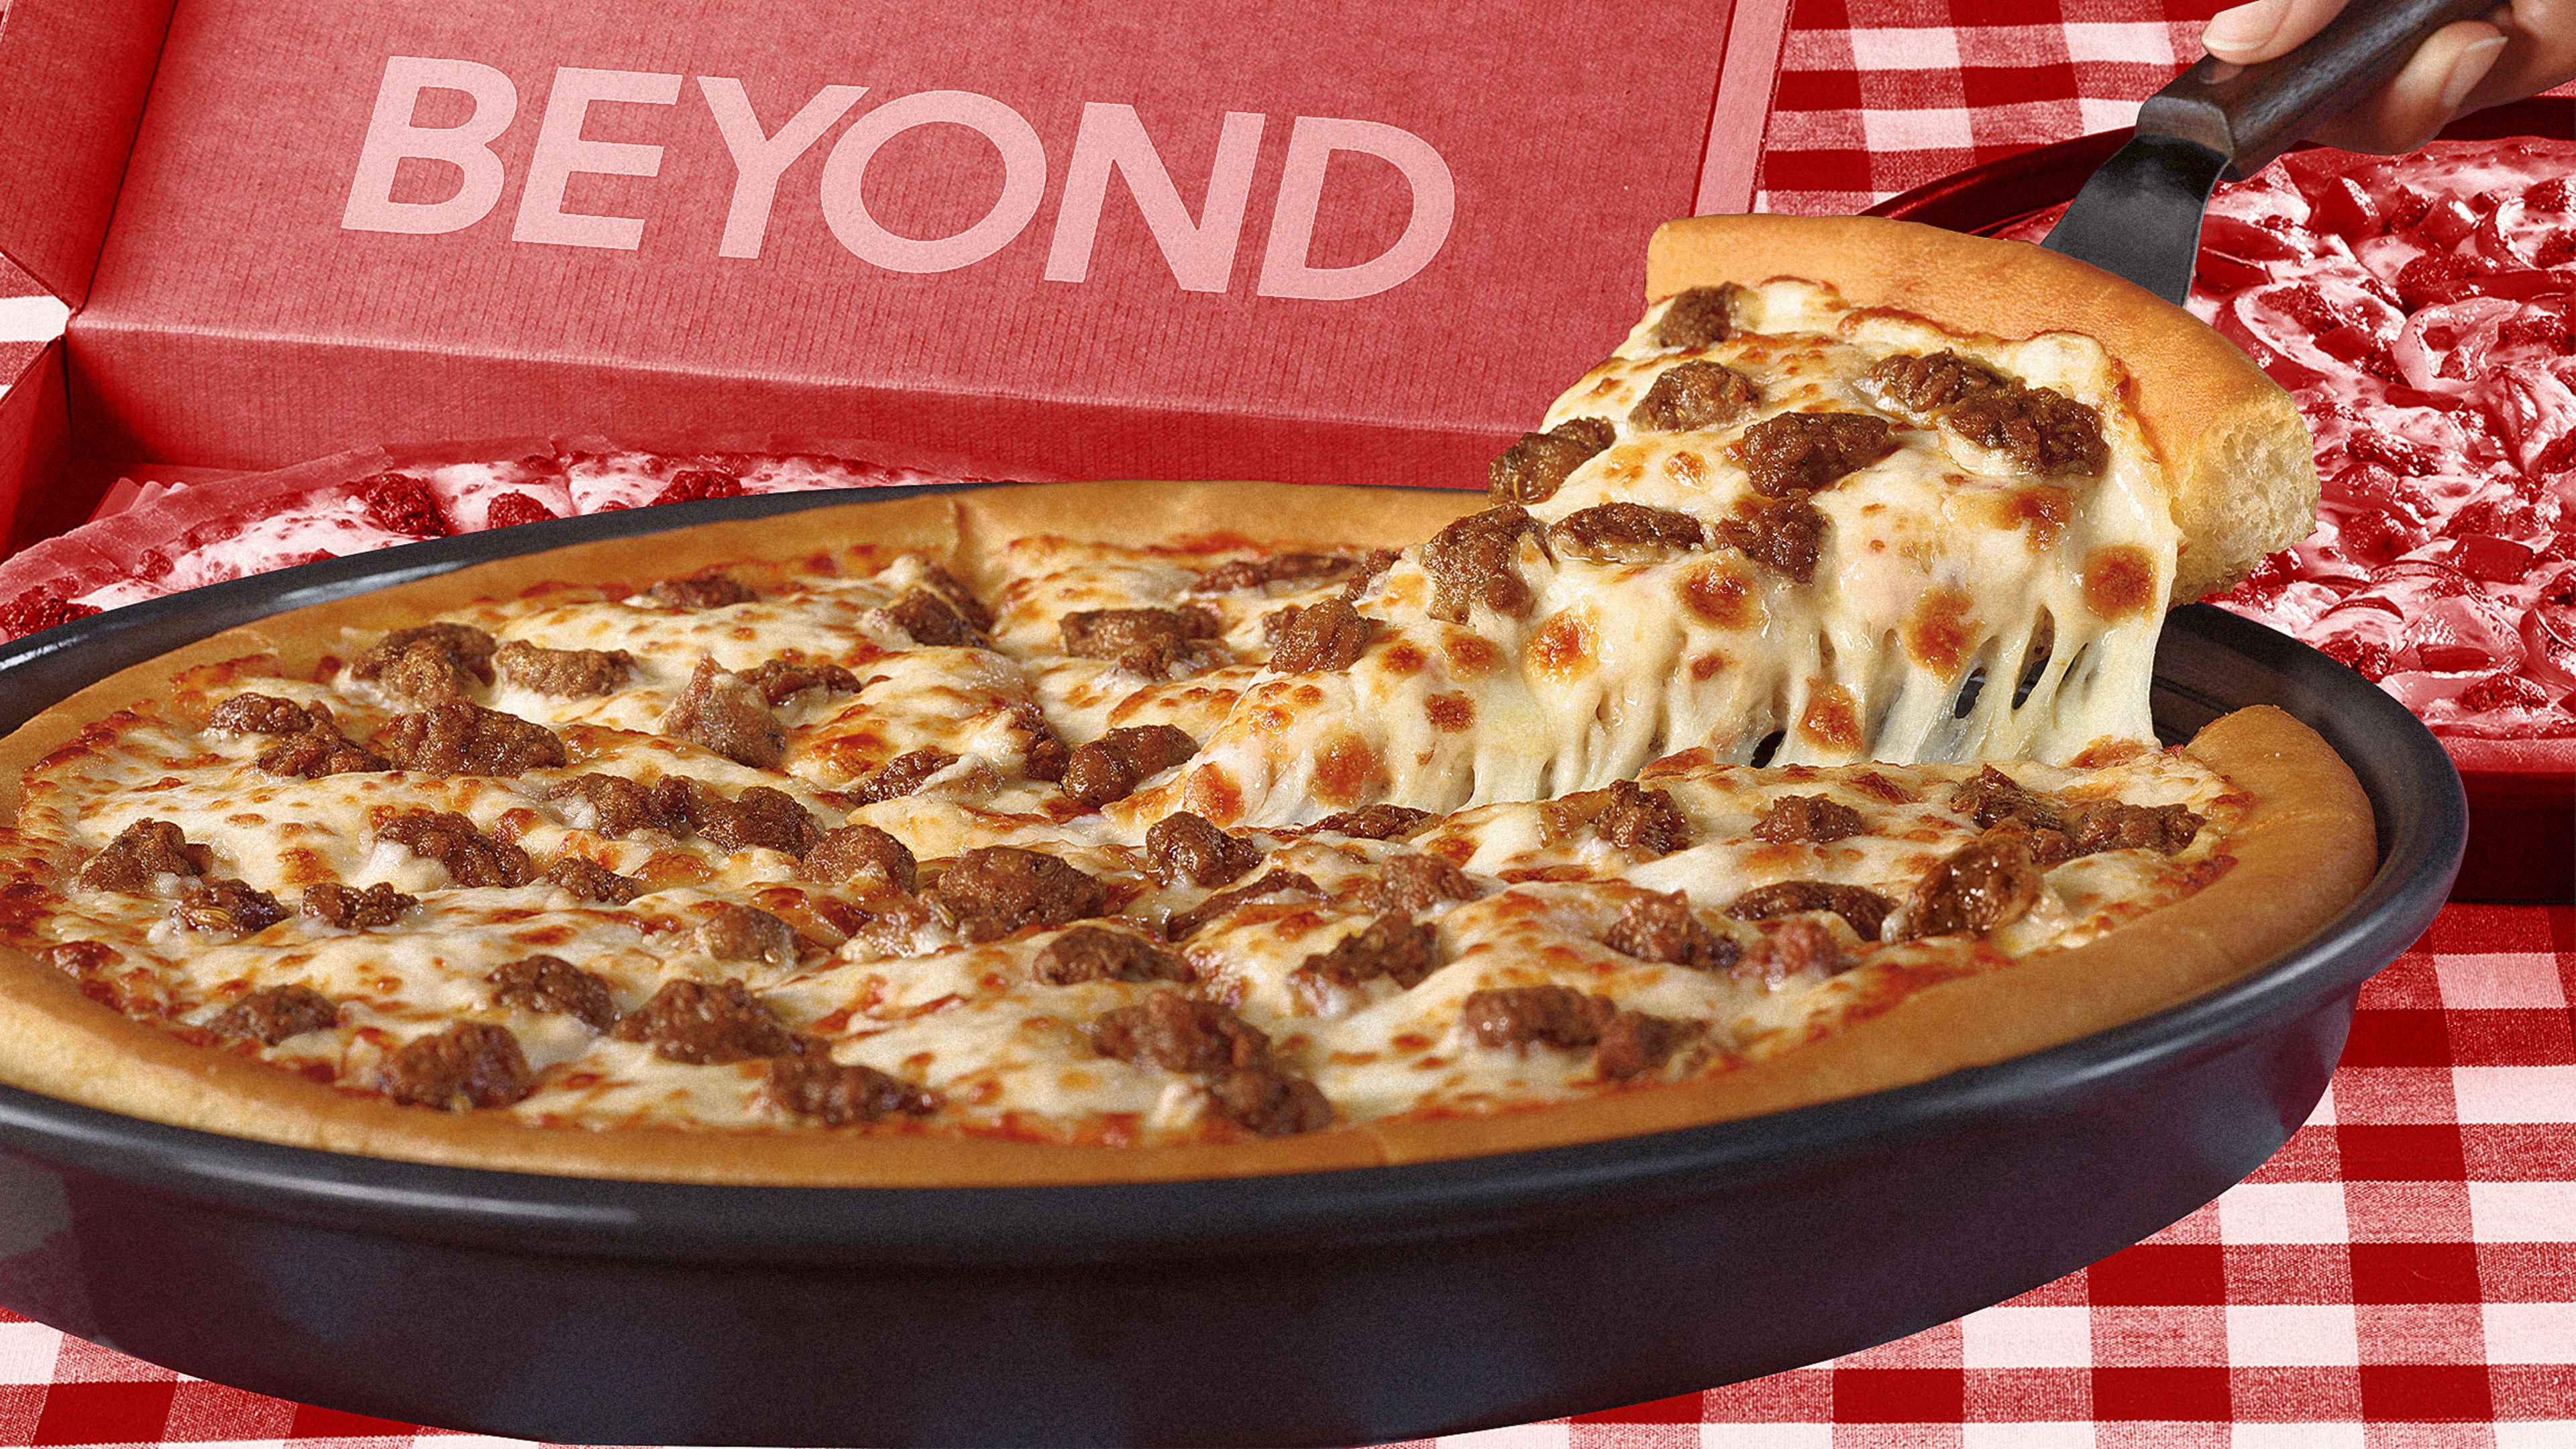 I tried Pizza Hut’s Beyond Meat sausage pizza. It’s good enough to ditch meat